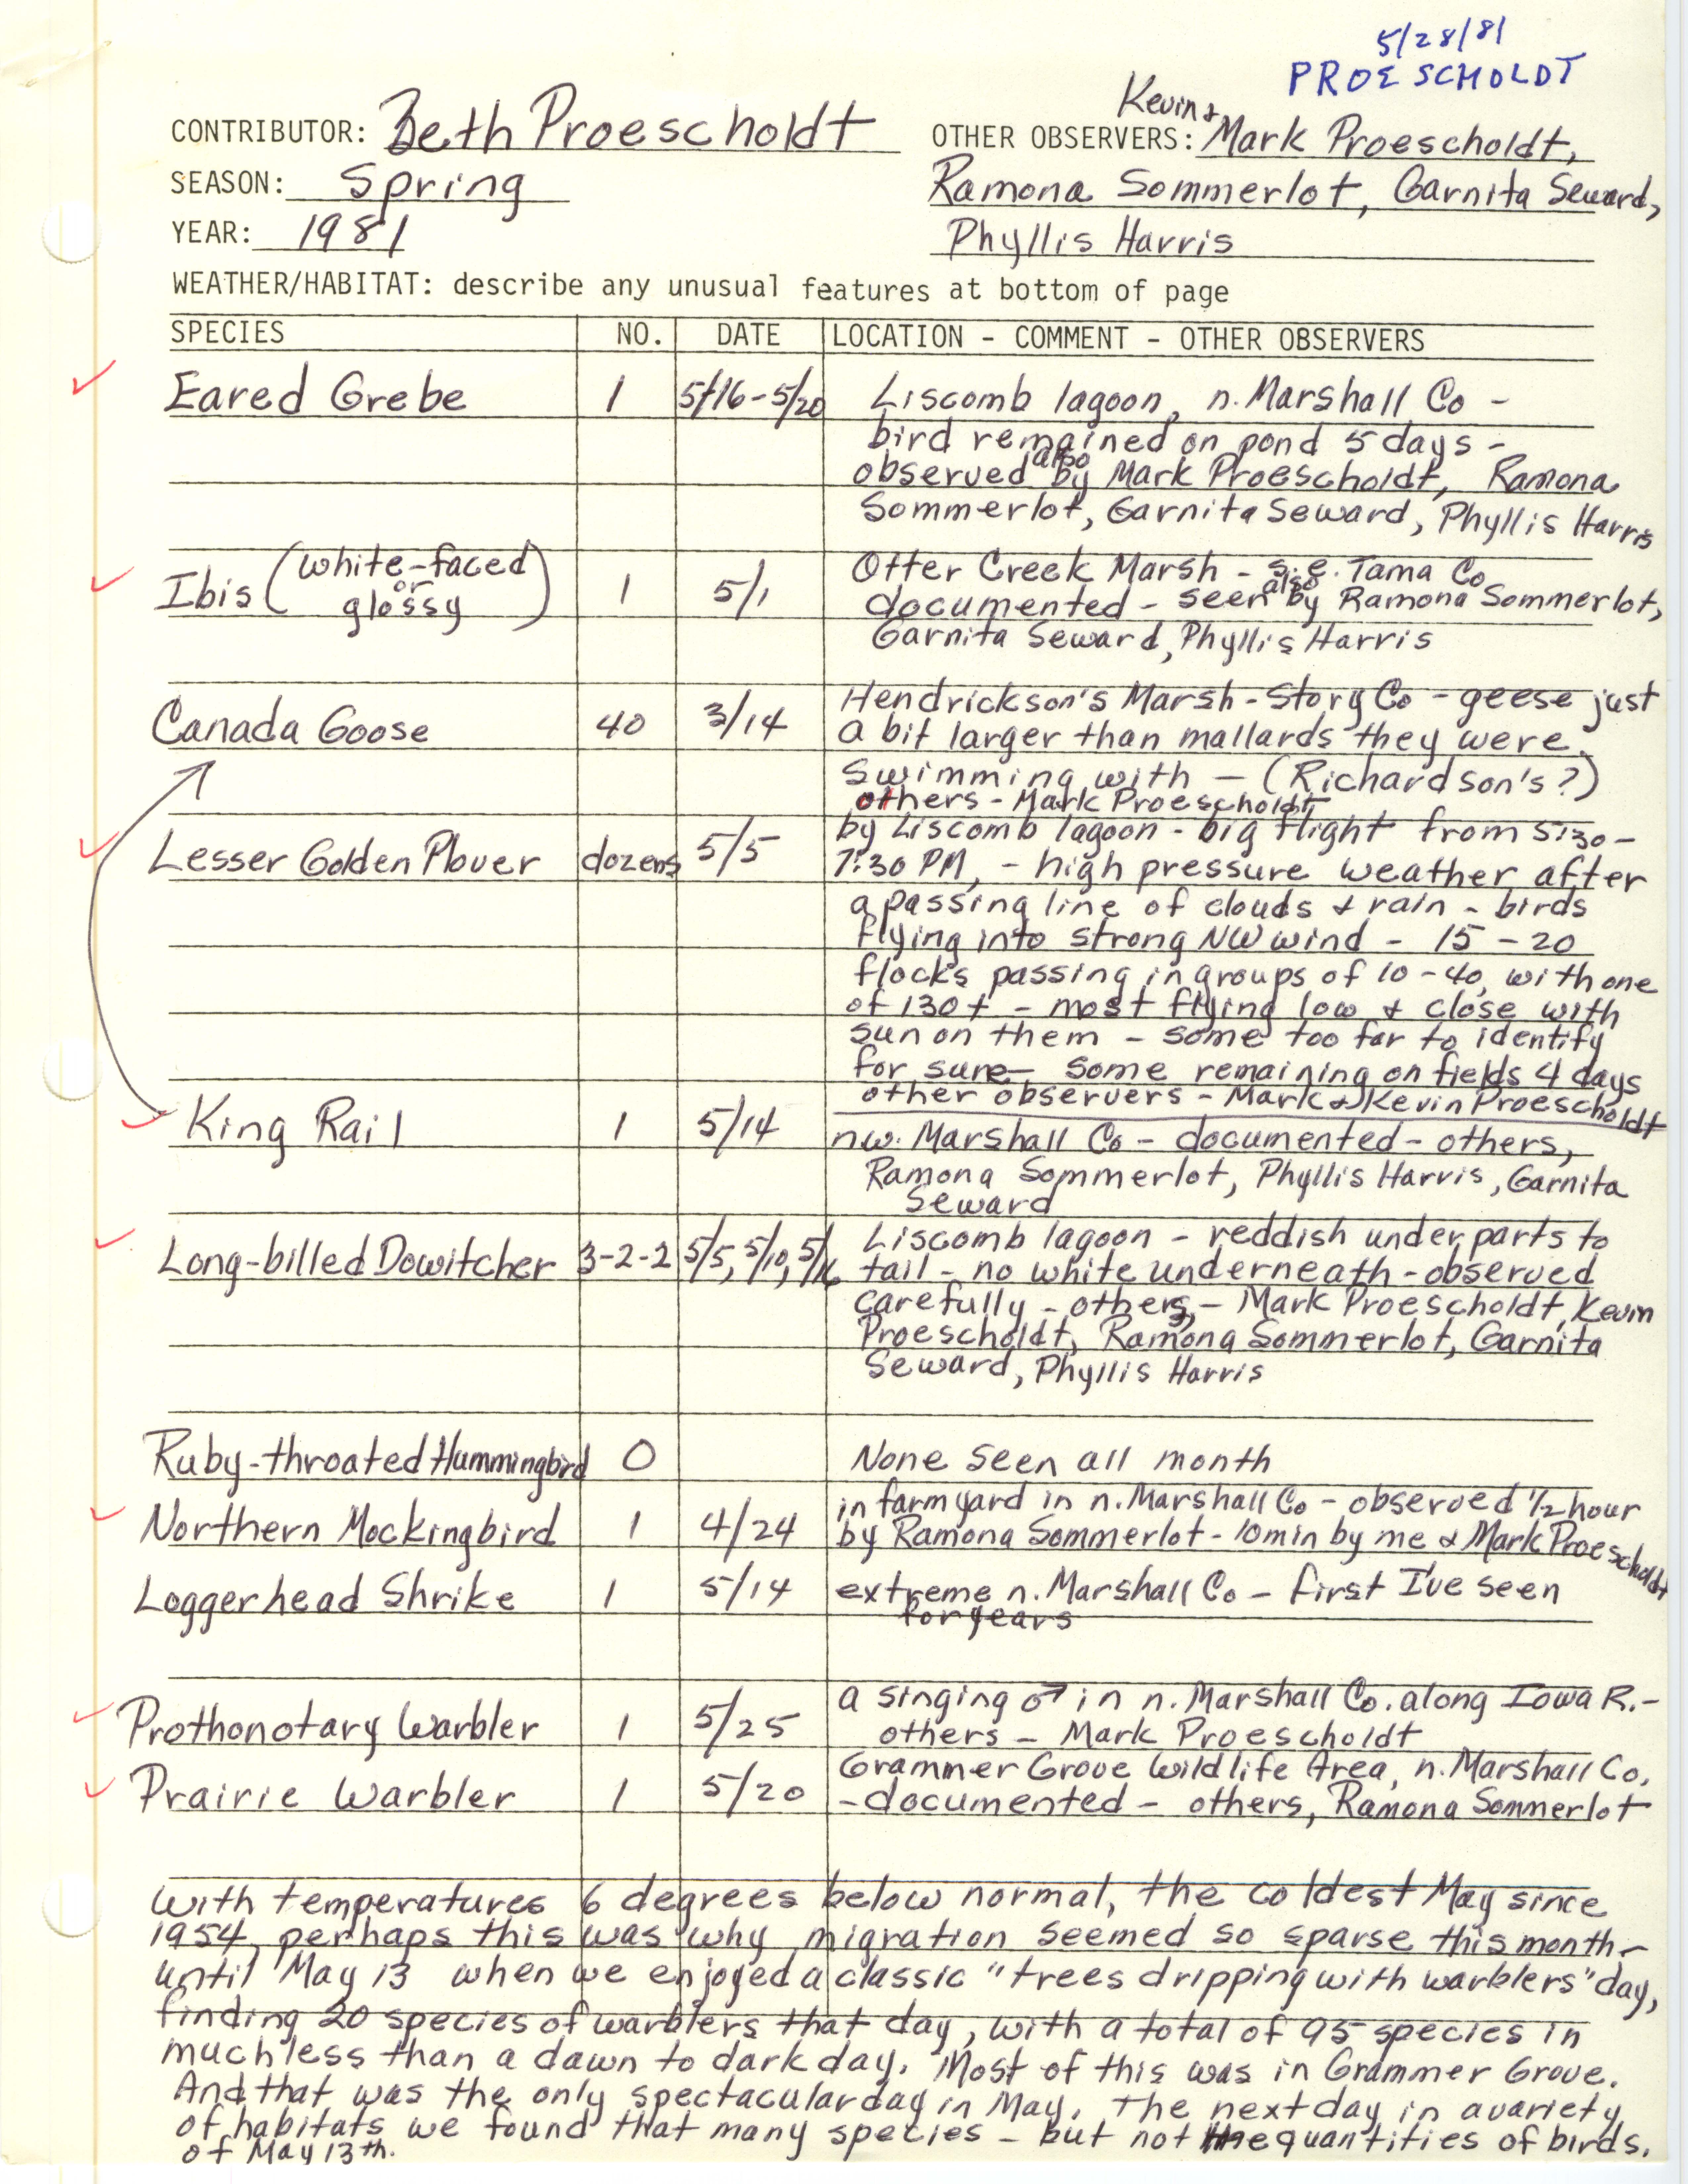 Annotated bird sighting list for Spring 1981 compiled by Beth Proescholdt